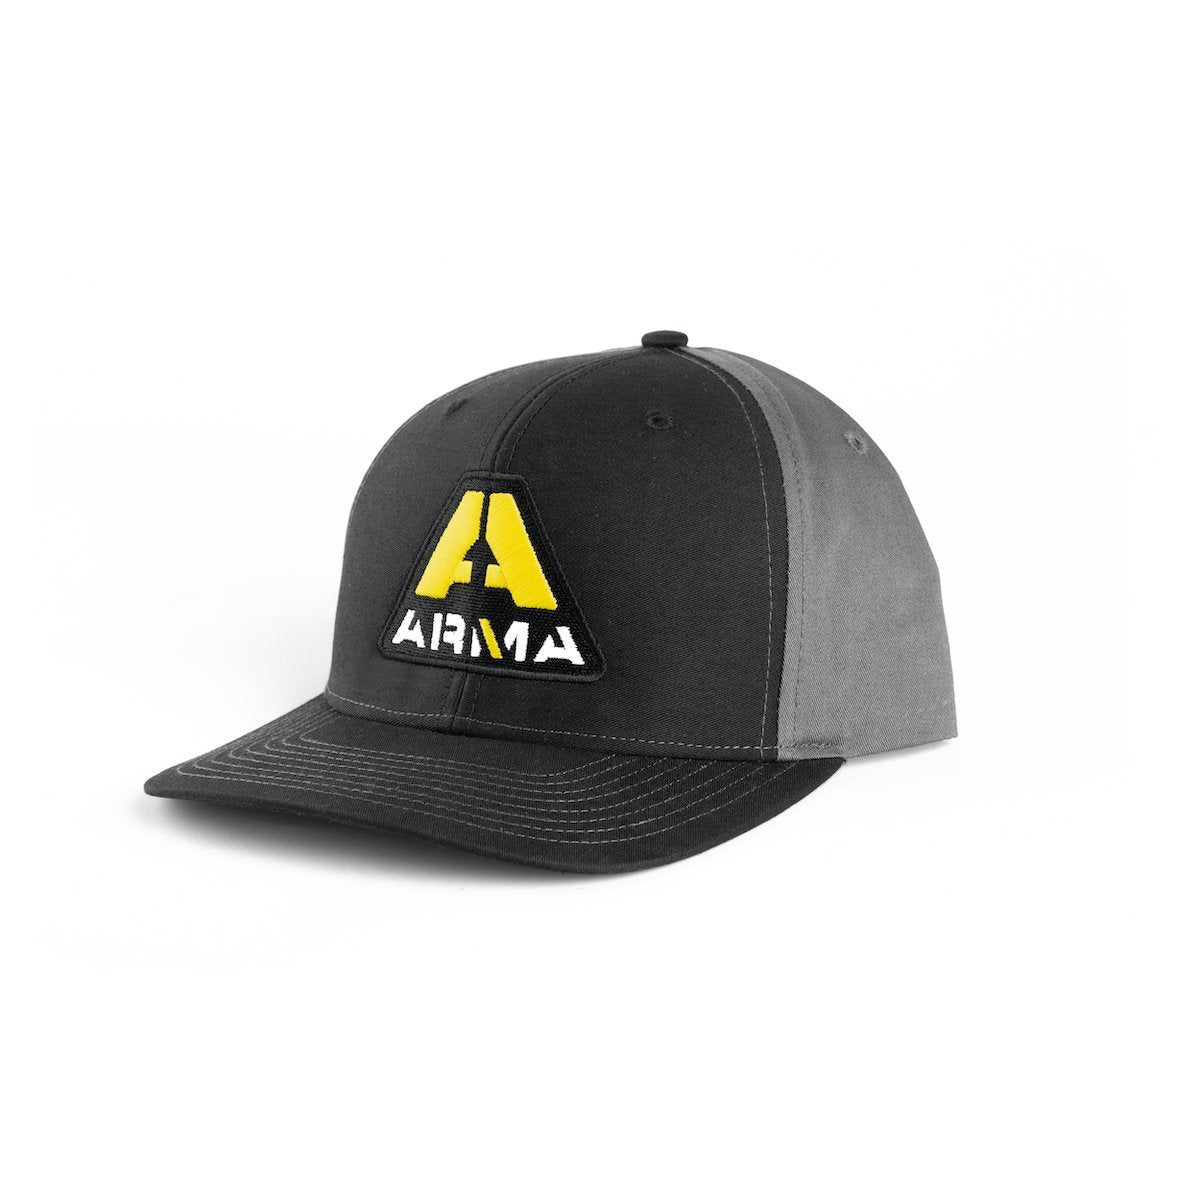 Stacked Twill - Black/Charcoal - Arma Sport